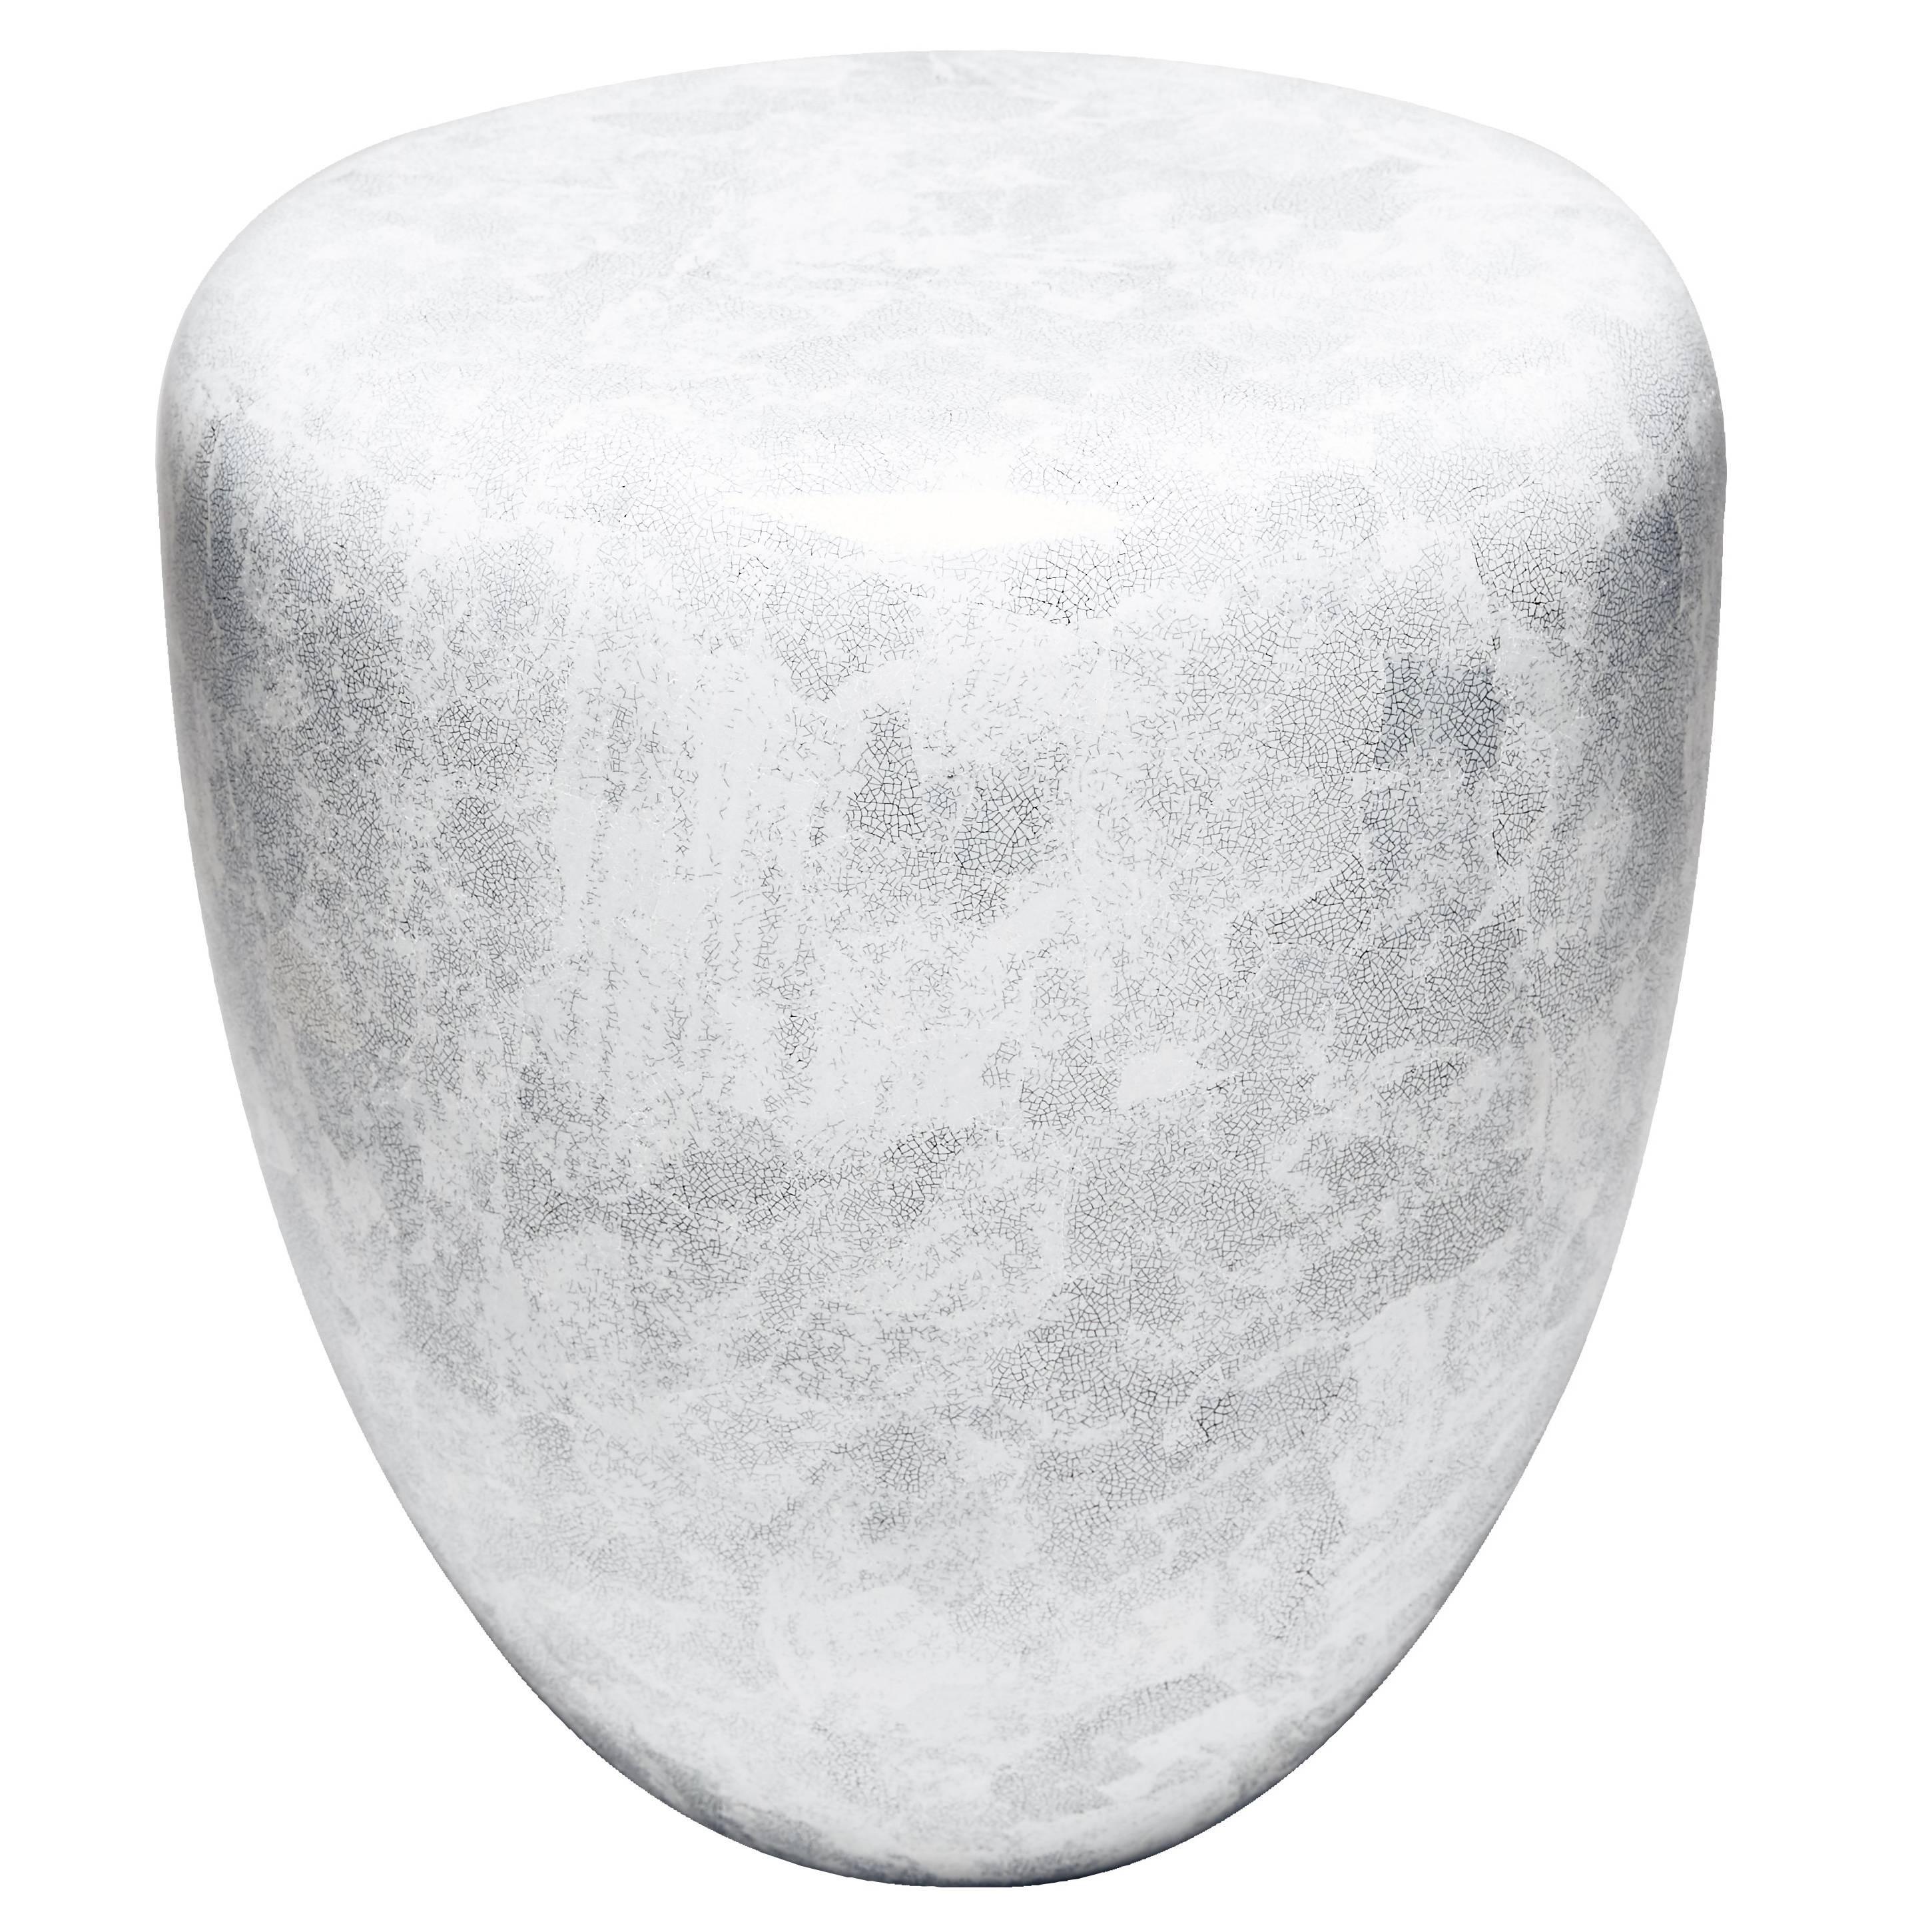 Side Table, White Eggshell DOT by Reda Amalou Design, 2016-Glossy or mate